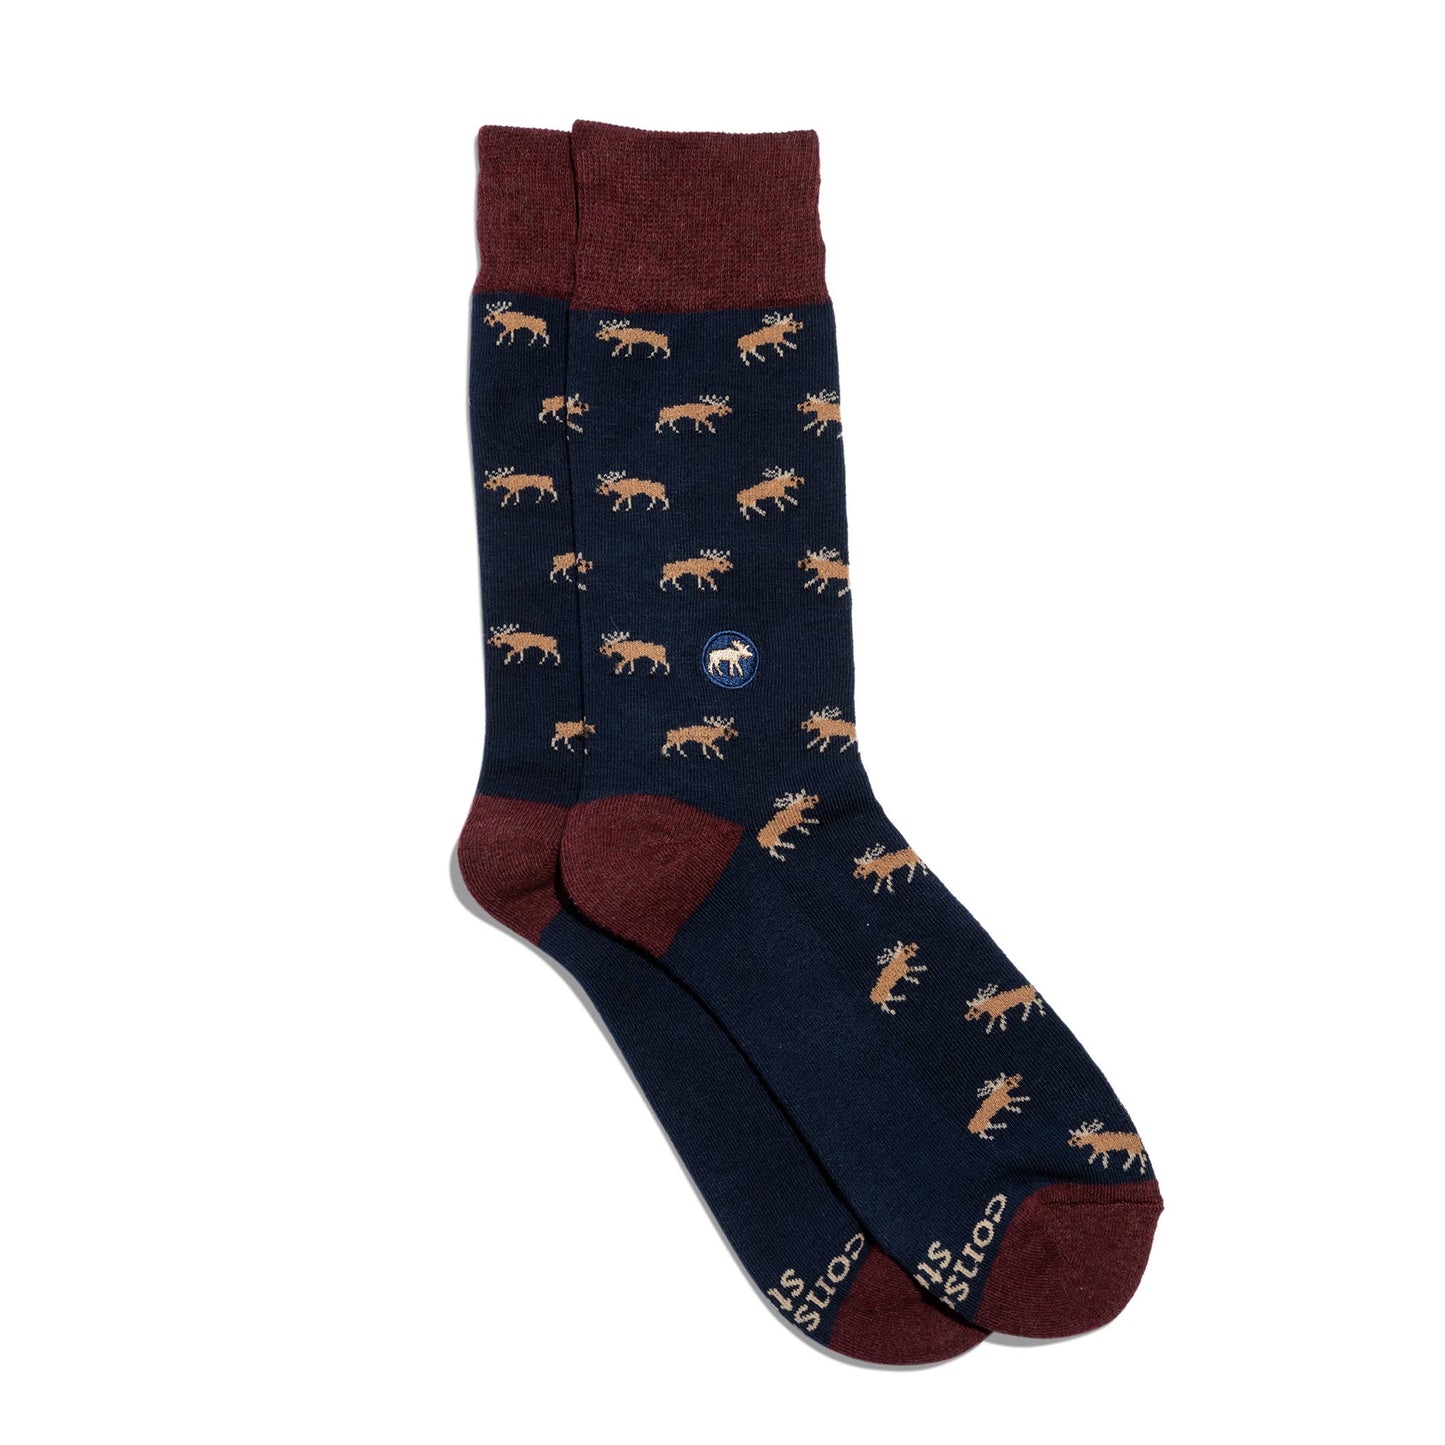 Conscious Step - Socks that Protect Moose  Conscious Step   -better made easy-eco-friendly-sustainable-gifting